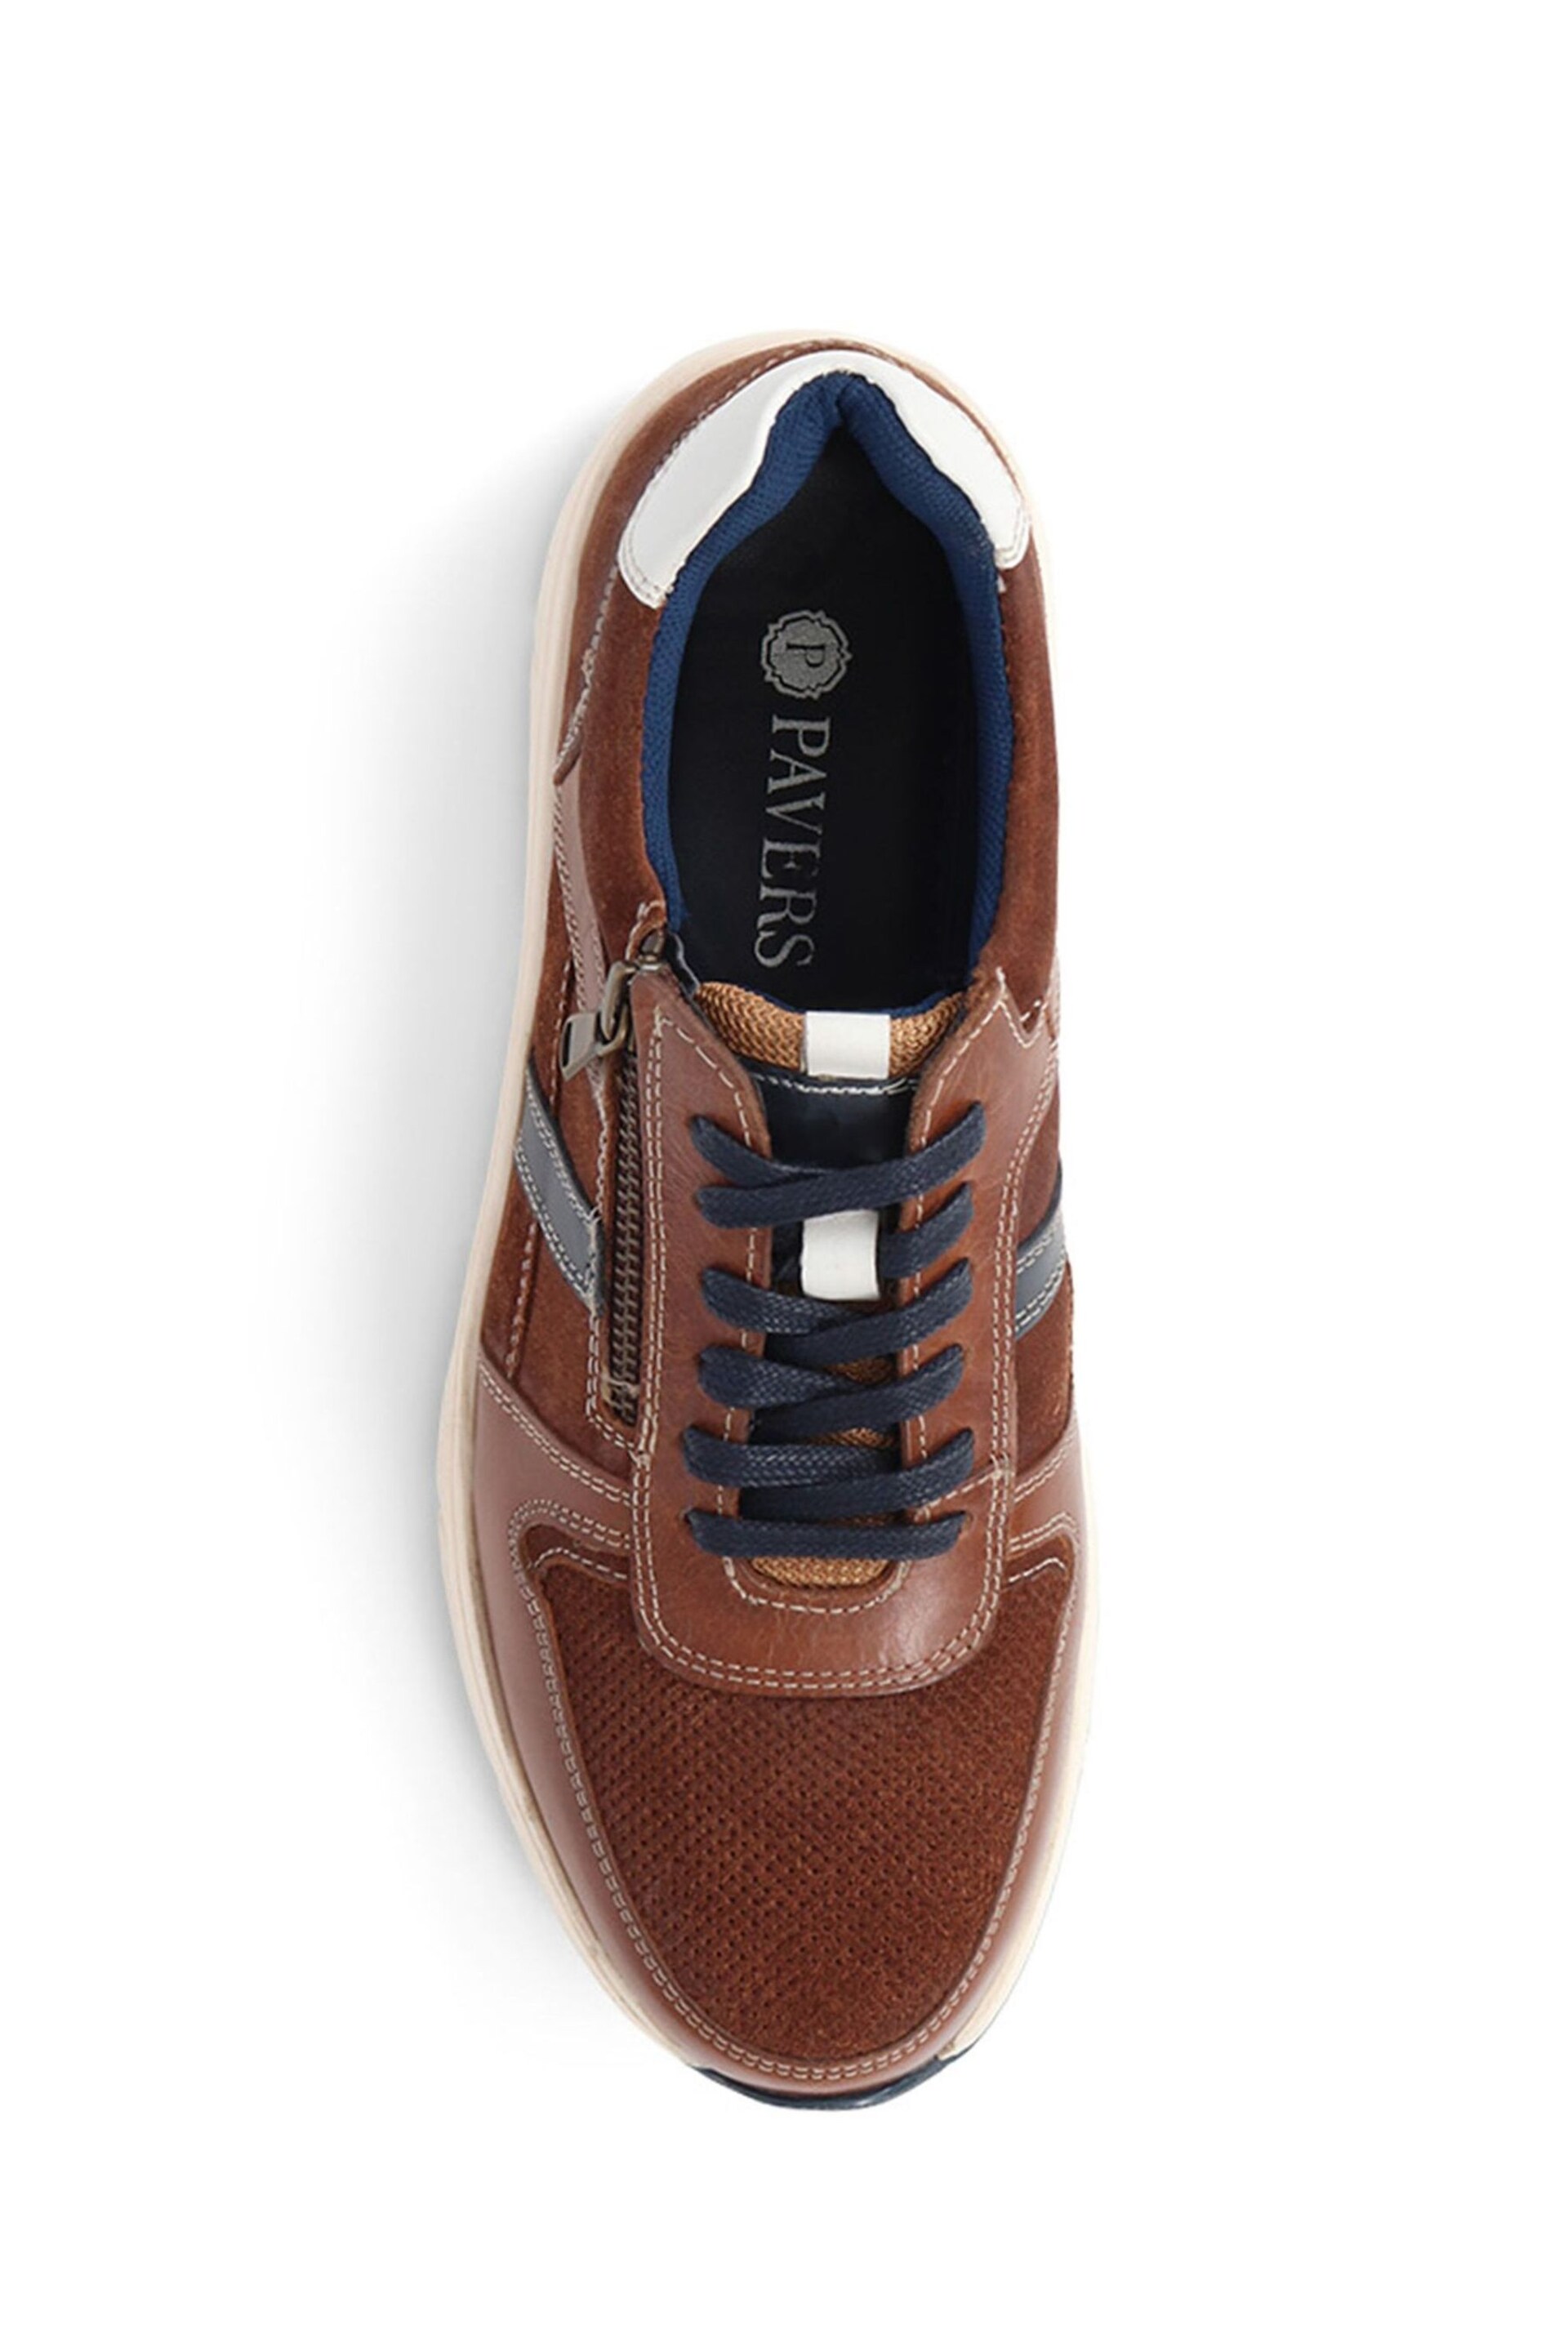 Pavers Lace Up Leather Brown Trainers - Image 3 of 5